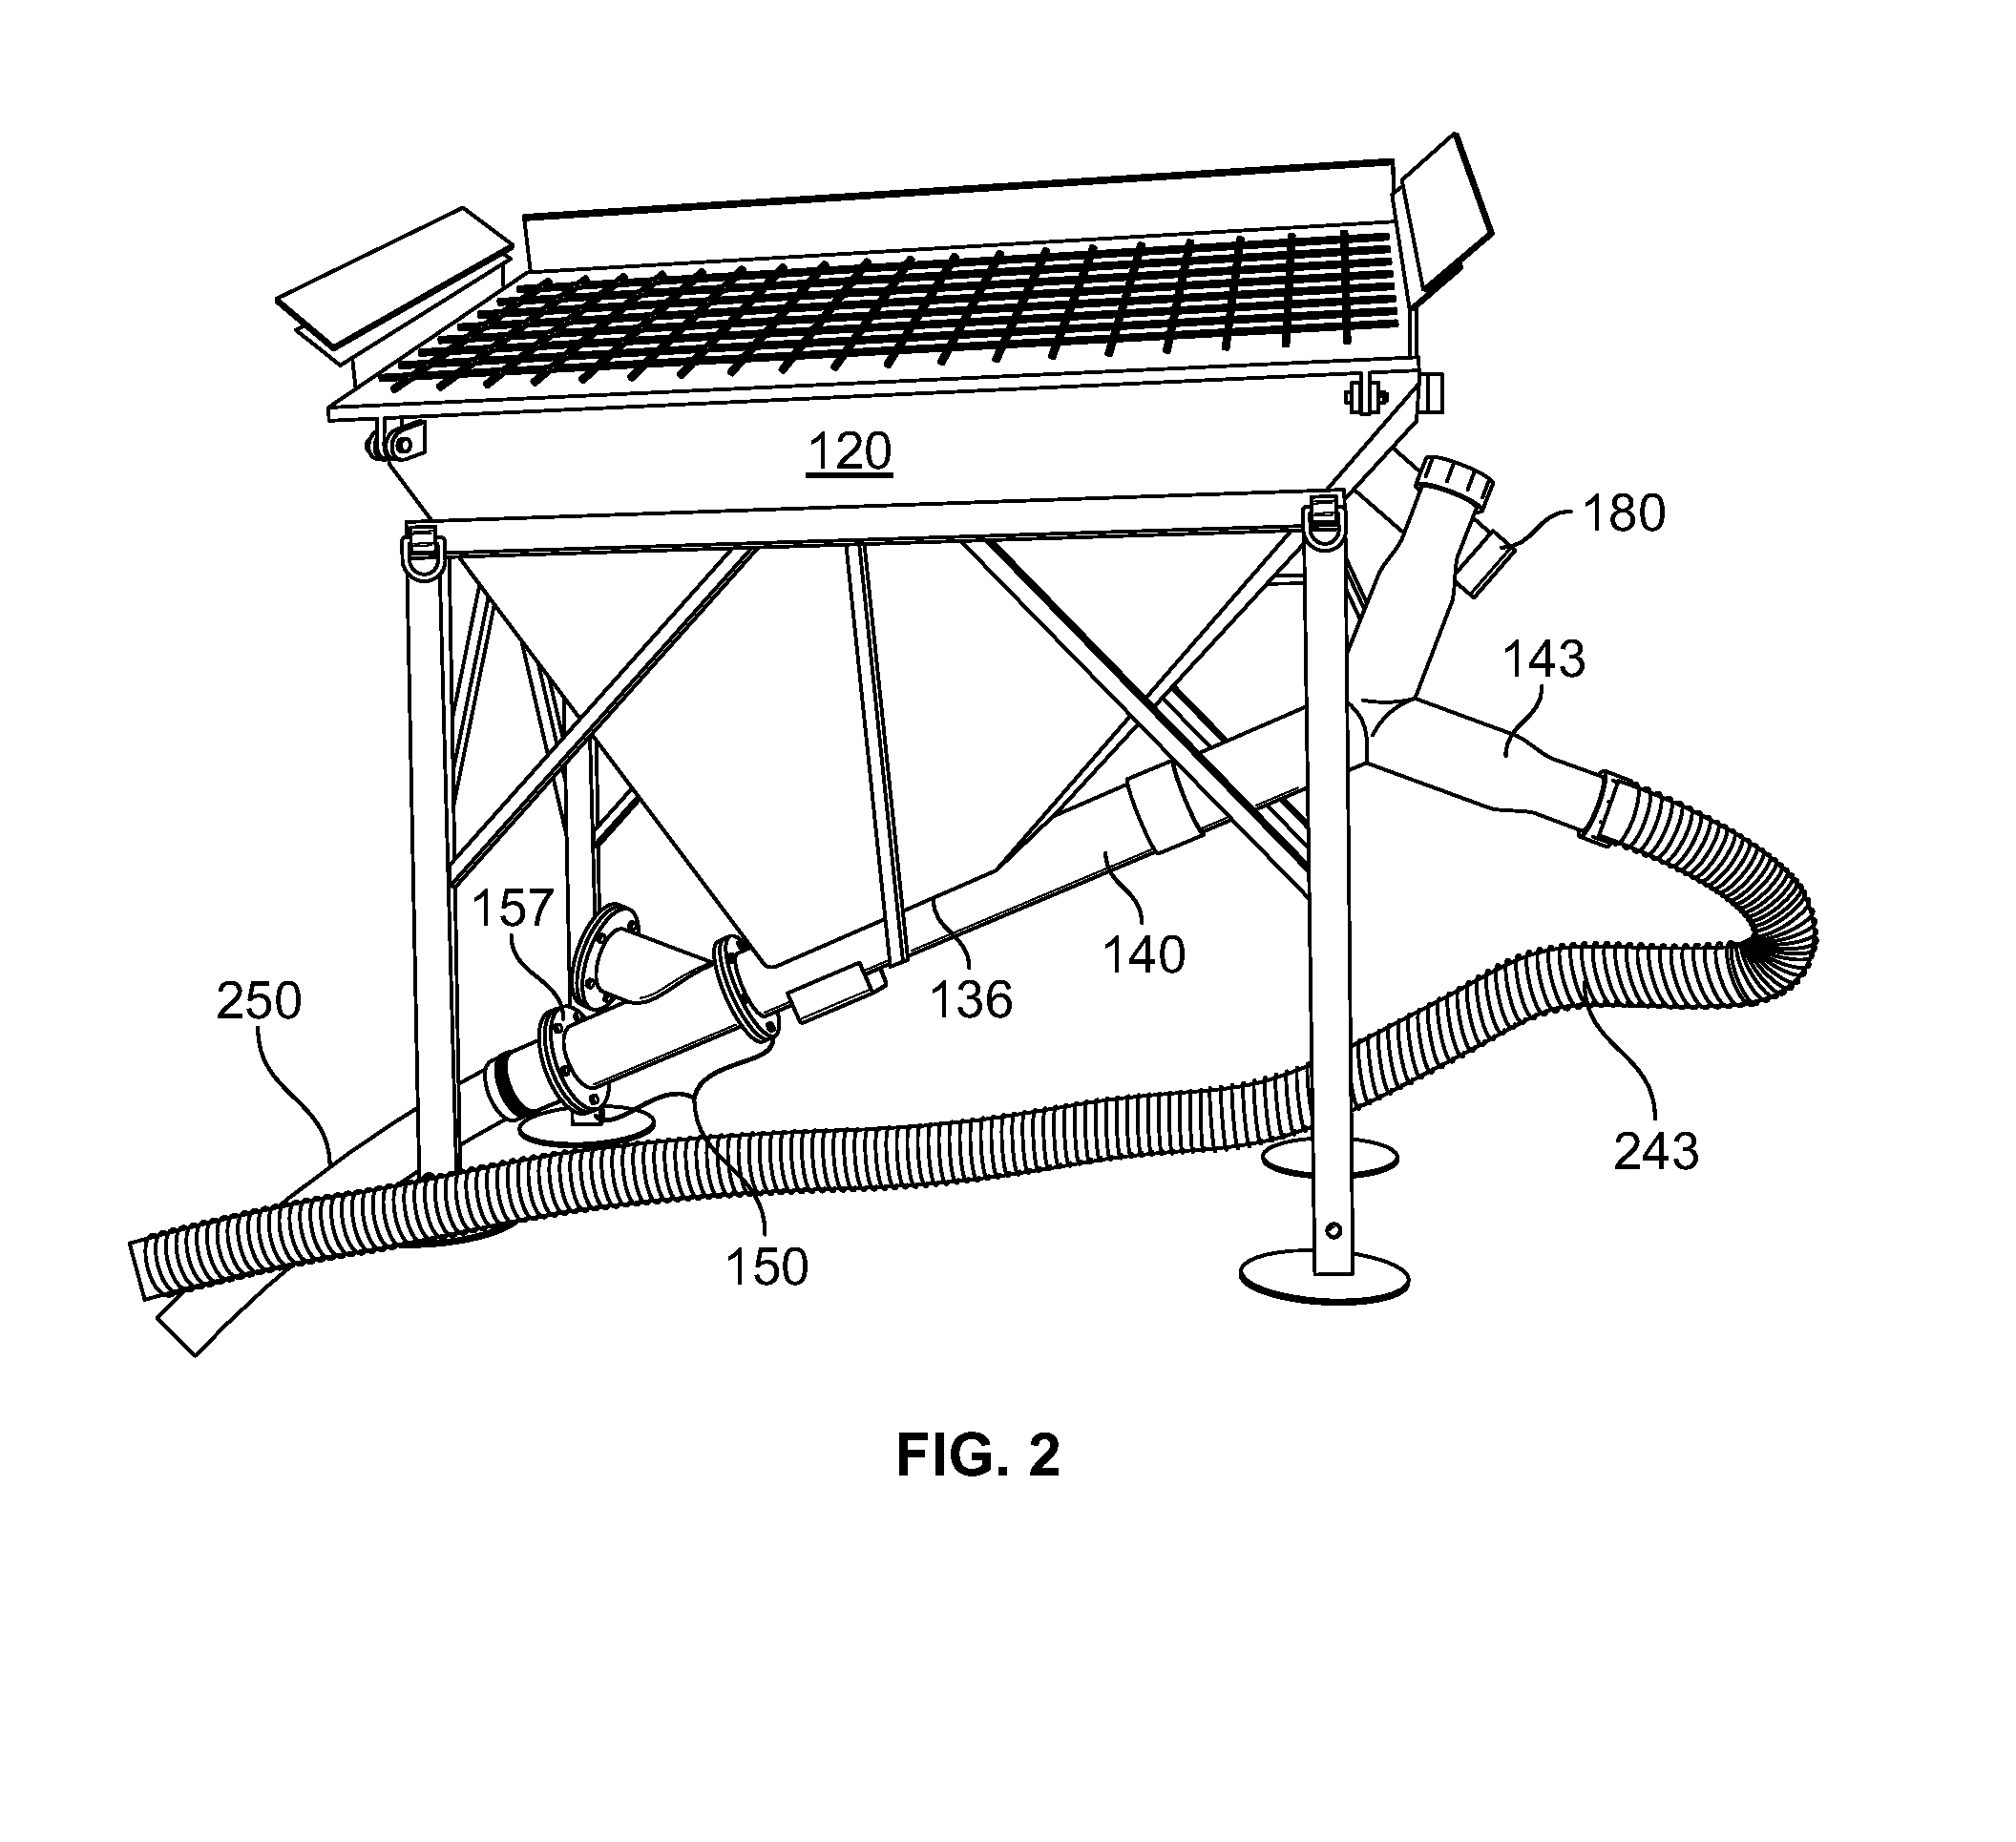 Systems and methods for creating gravel bars